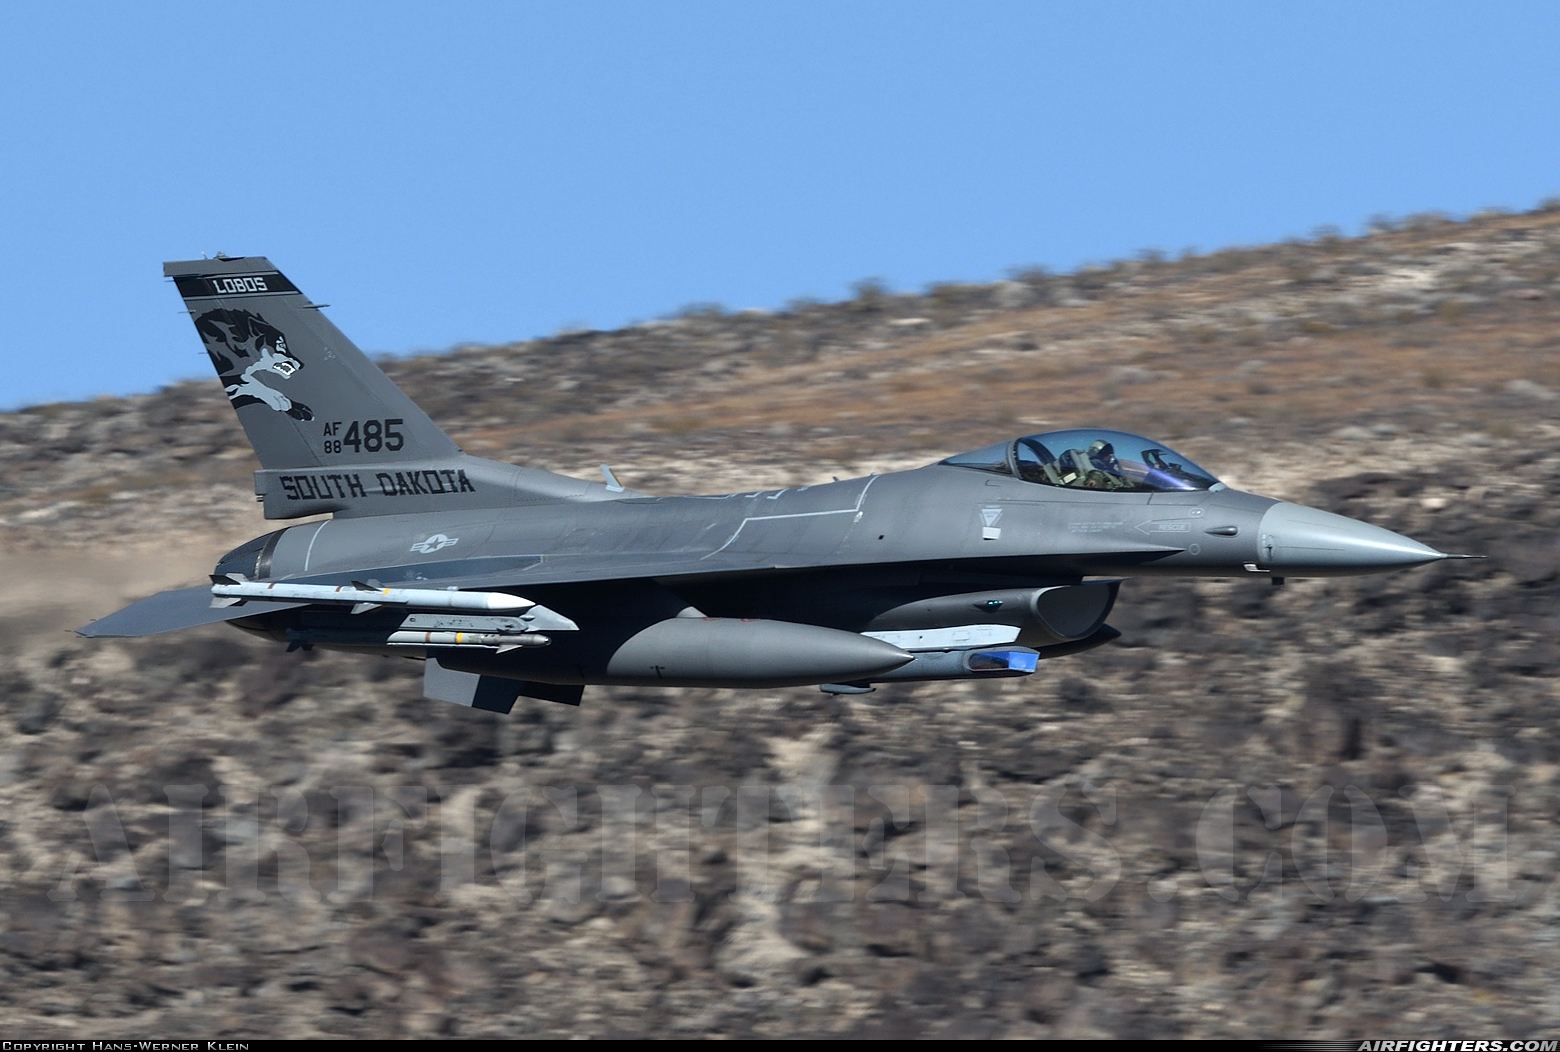 USA - Air Force General Dynamics F-16C Fighting Falcon 88-0485 at Off-Airport - Rainbow Canyon area, USA